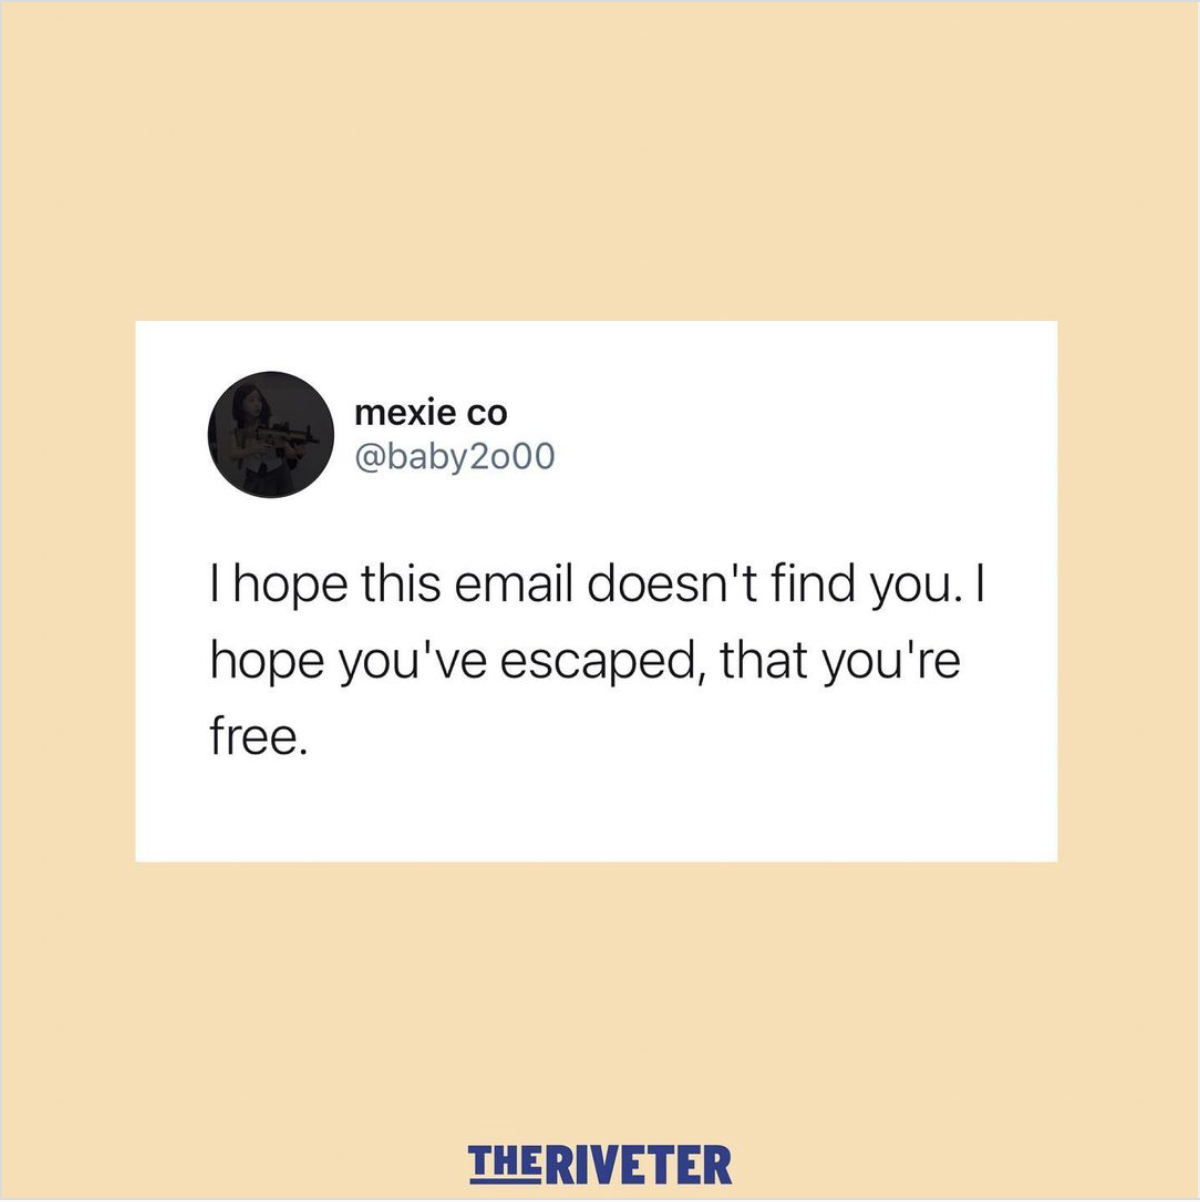 "I hope this email doesn't find you. I hope you've escaped, that you're free." From The Riveter on Instagram